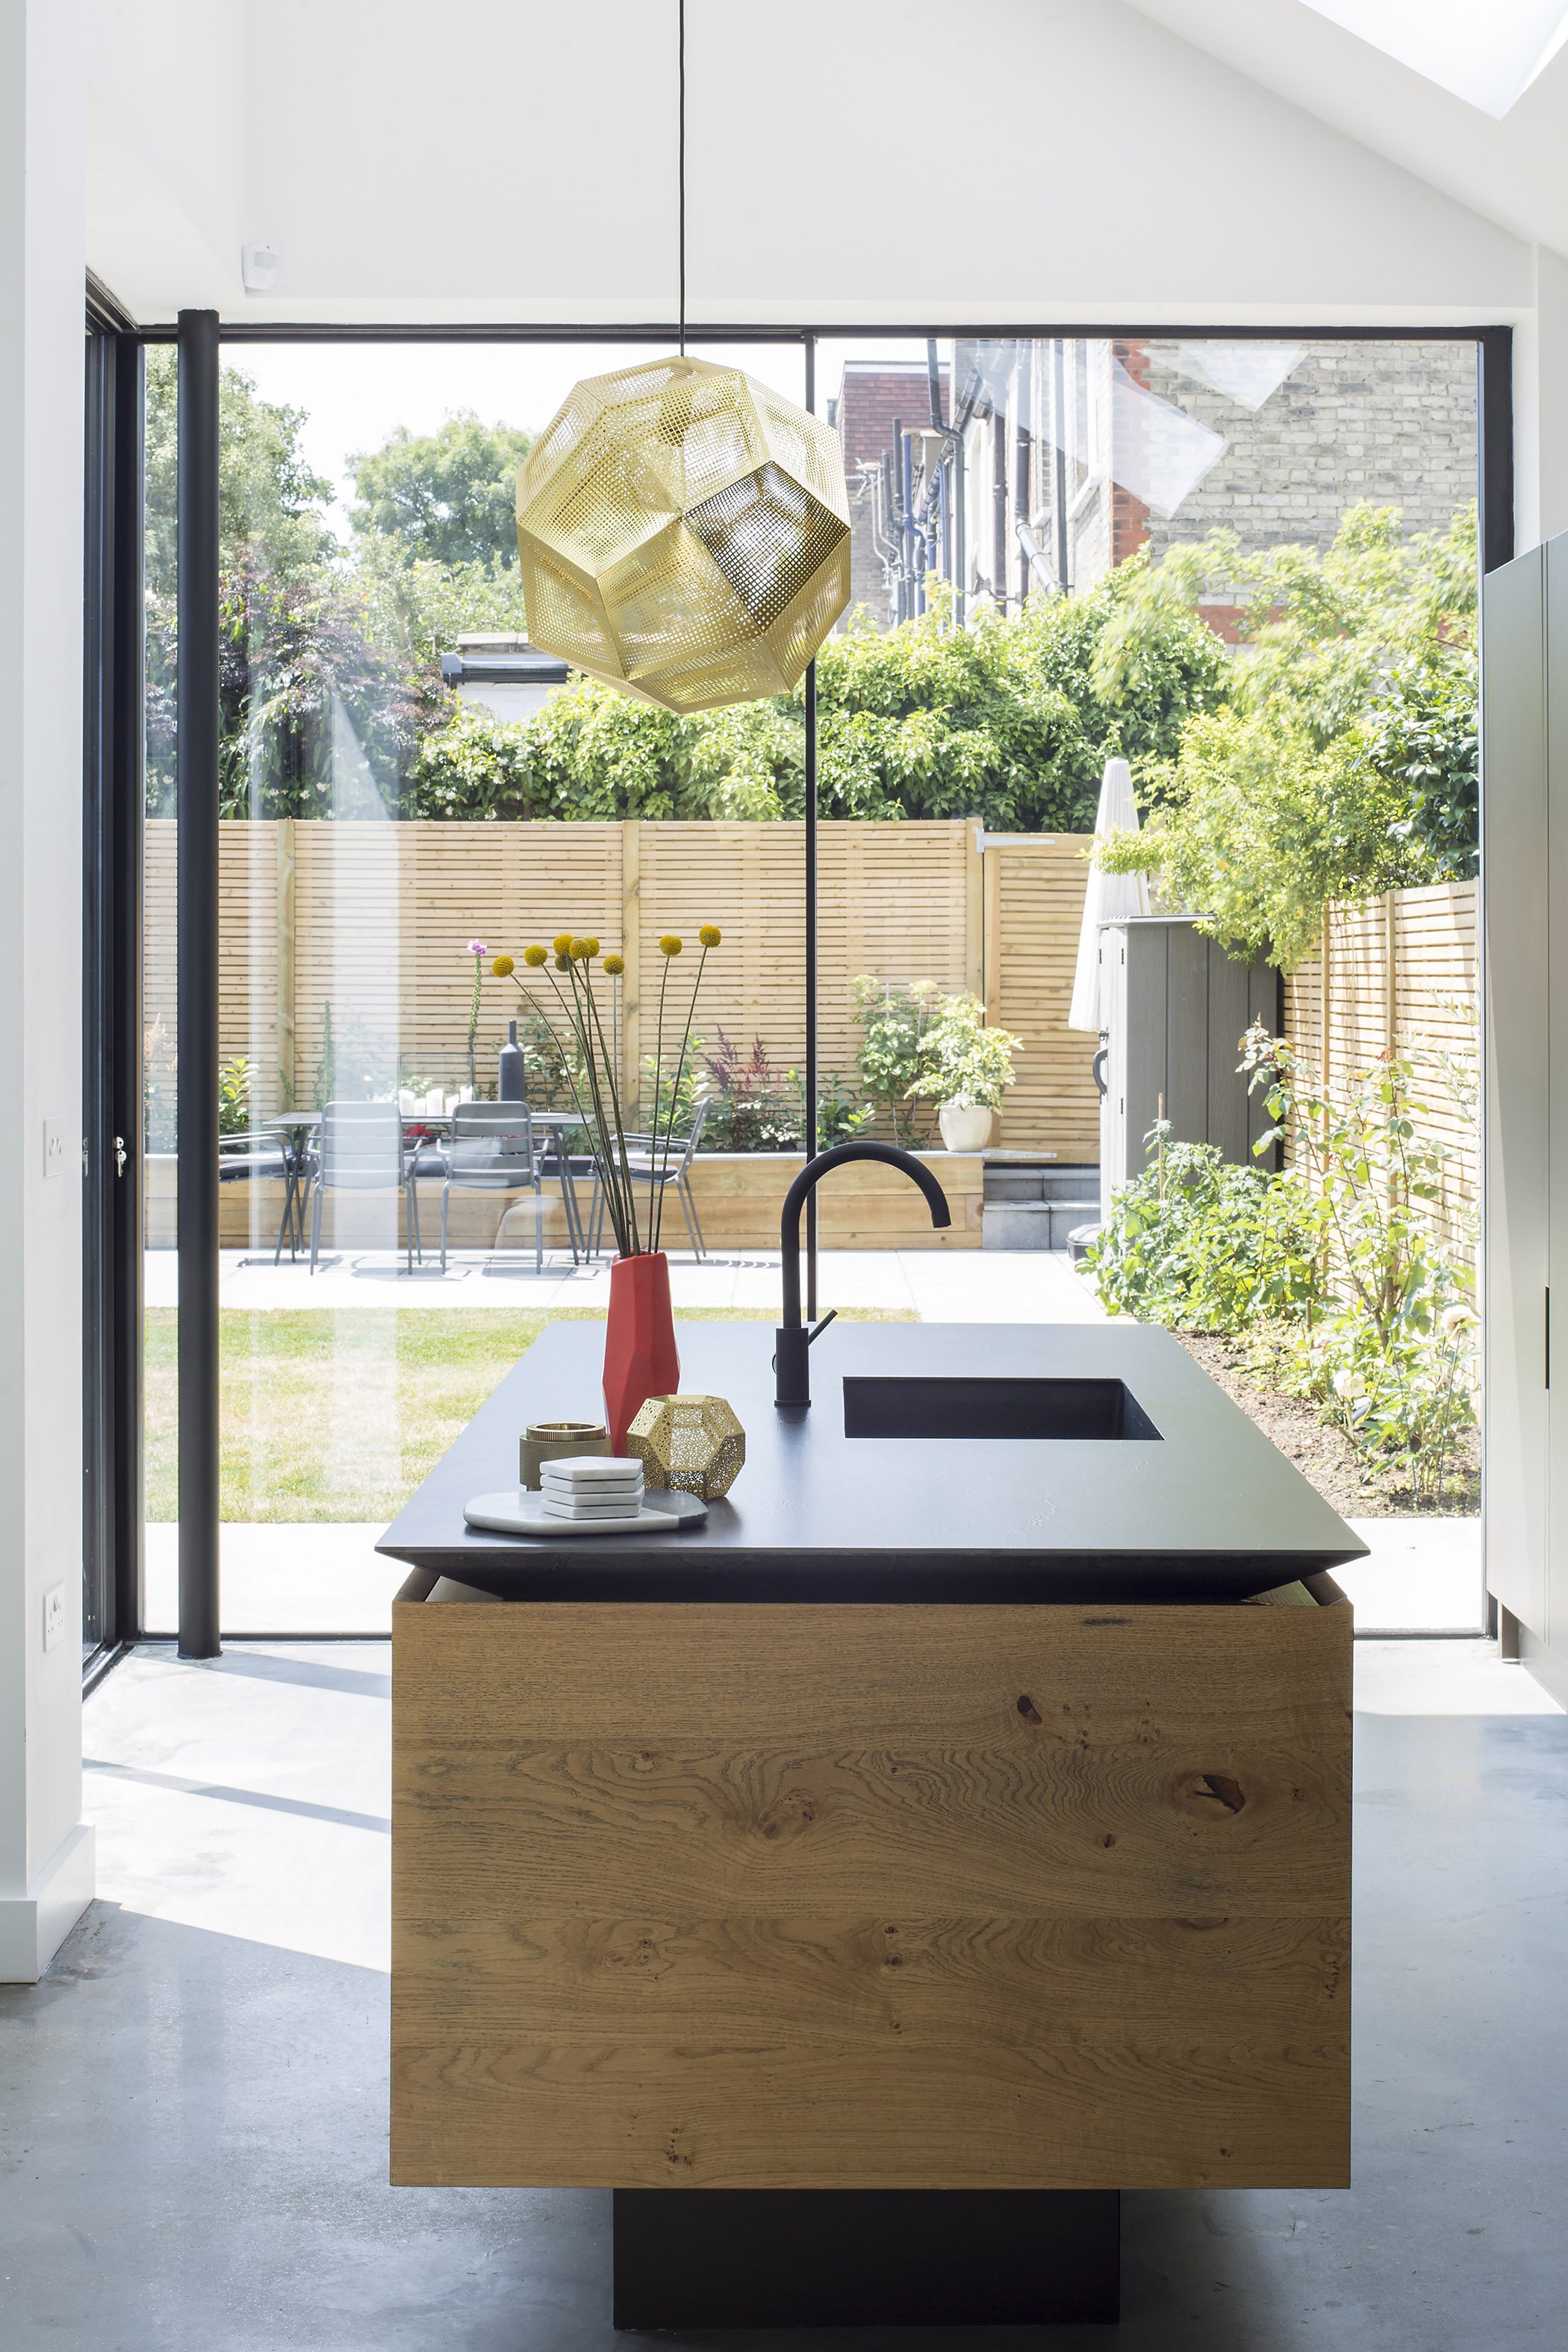 </p> <p>Find your ideal home design pro on designfor-me.com - get matched and see who's interested in your home project. Click image to see more inspiration from our design pros</p> <p>Design by Prue, architectural designer from Barnet, London</p> <p>#architecture #homedesign #modernhomes #homeinspiration #kitchens #kitchendesign #kitcheninspiration #kitchenideas #kitchengoals #glazing #architecturalglazing #naturallight </p> <p>